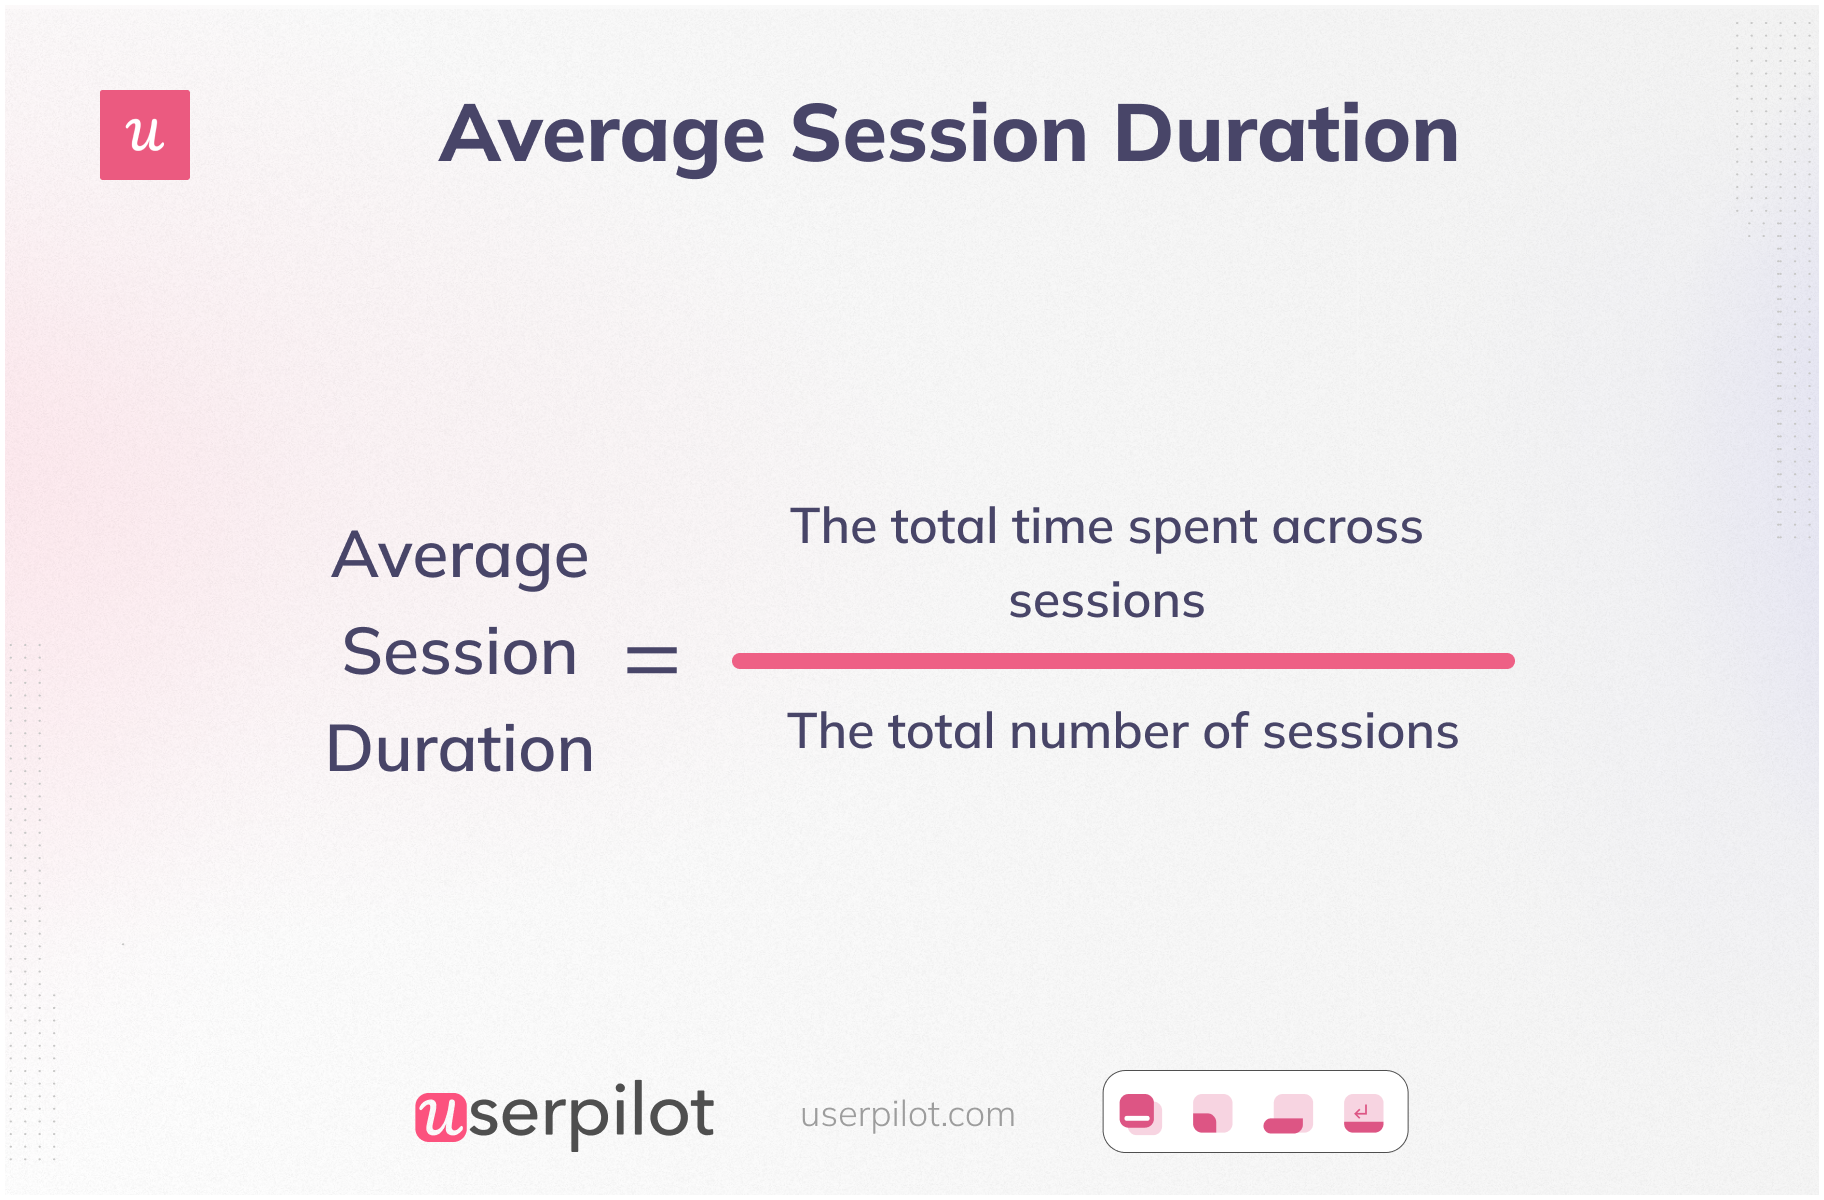 How to calculate average session duration